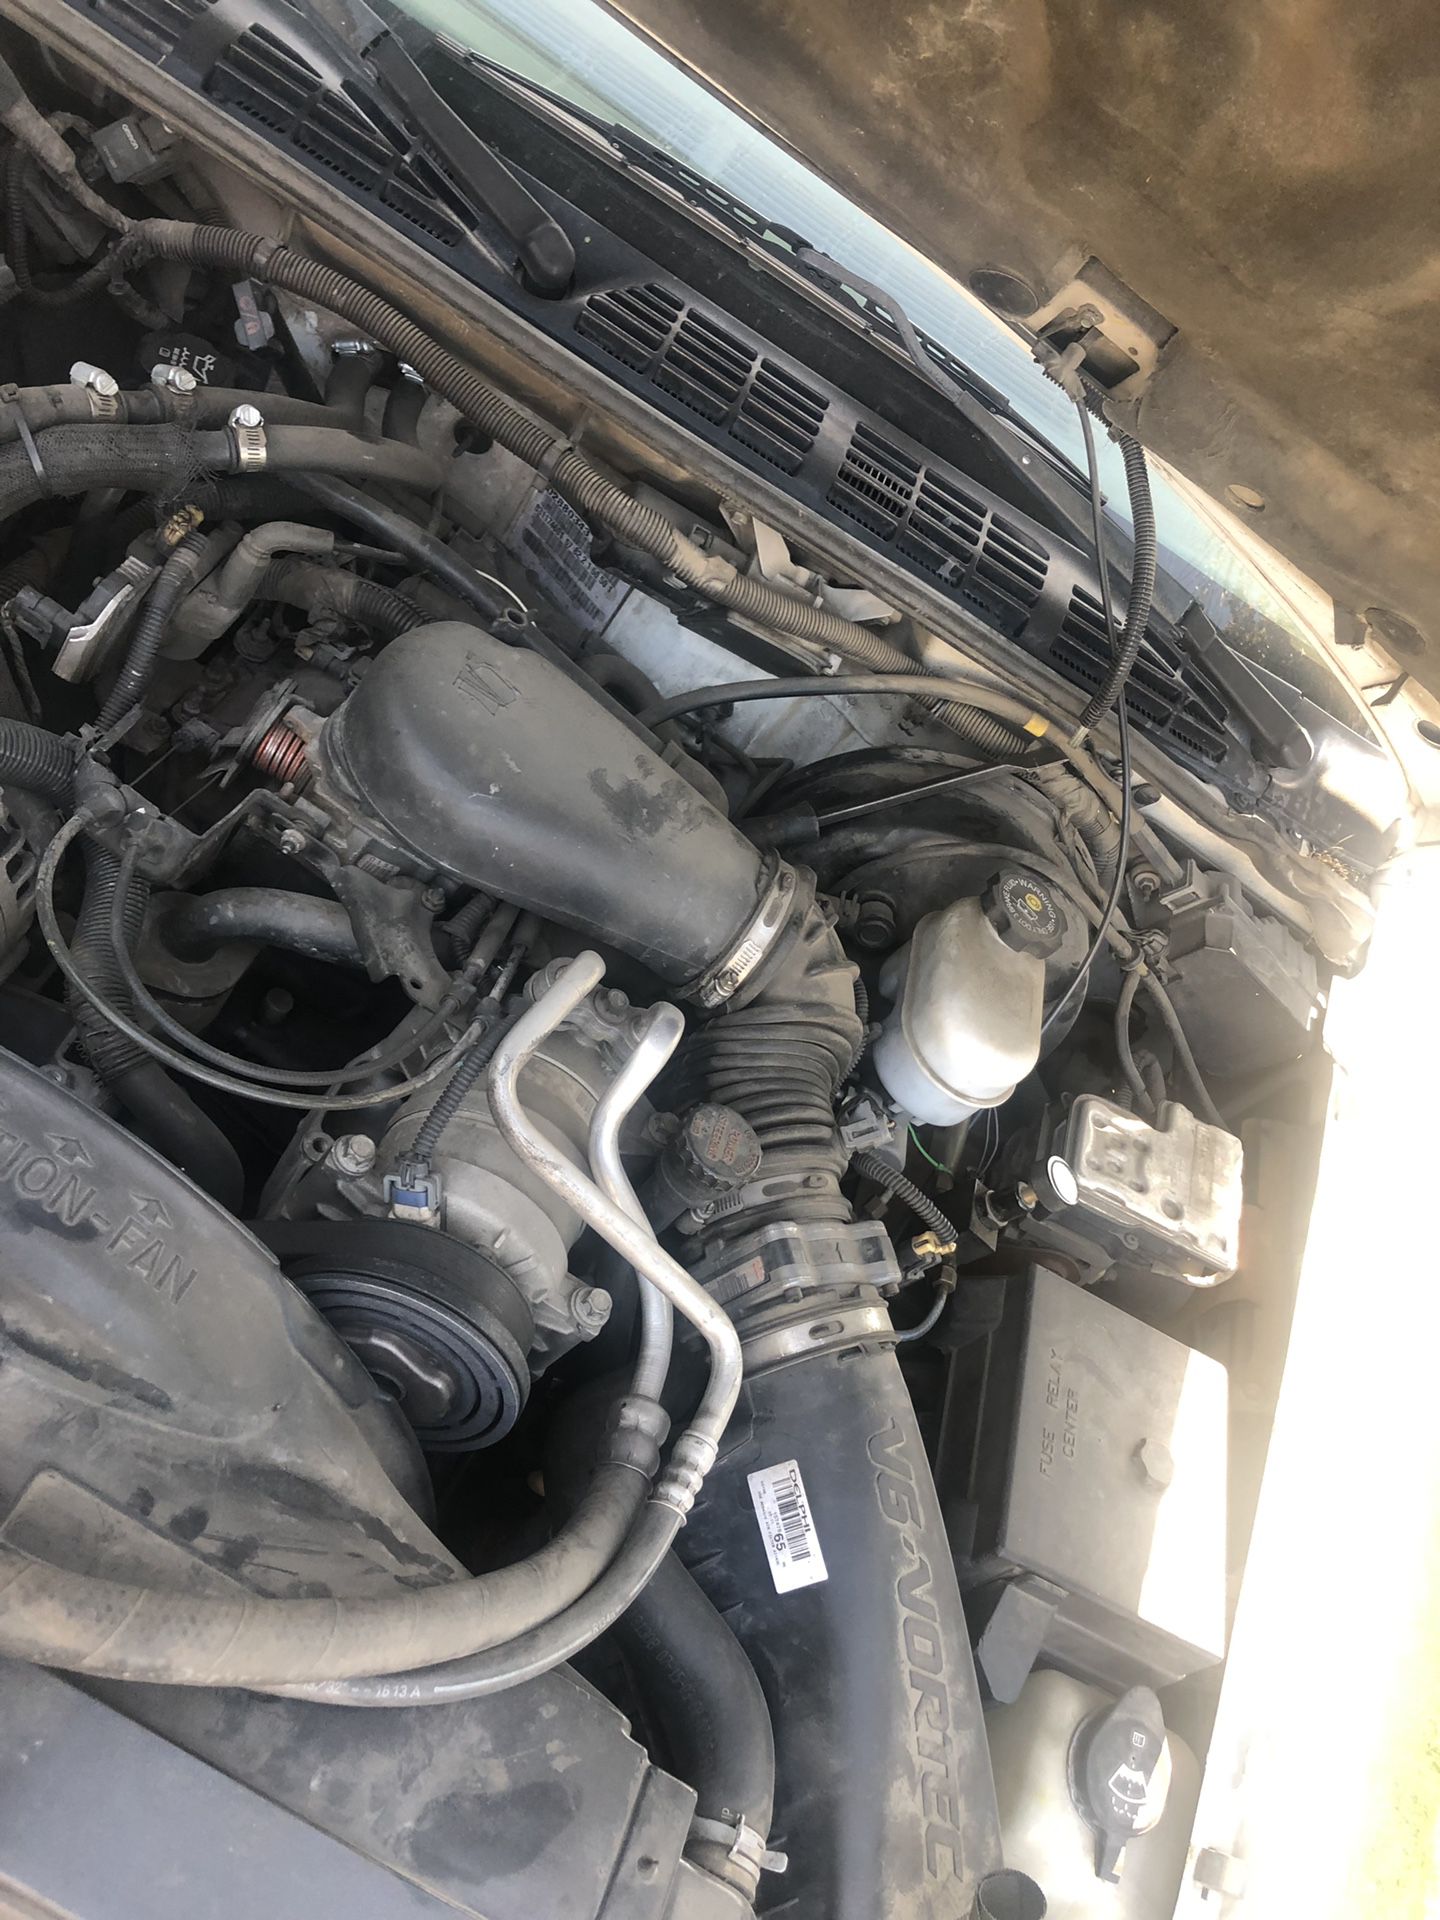 2003 Chevy s10 for parts